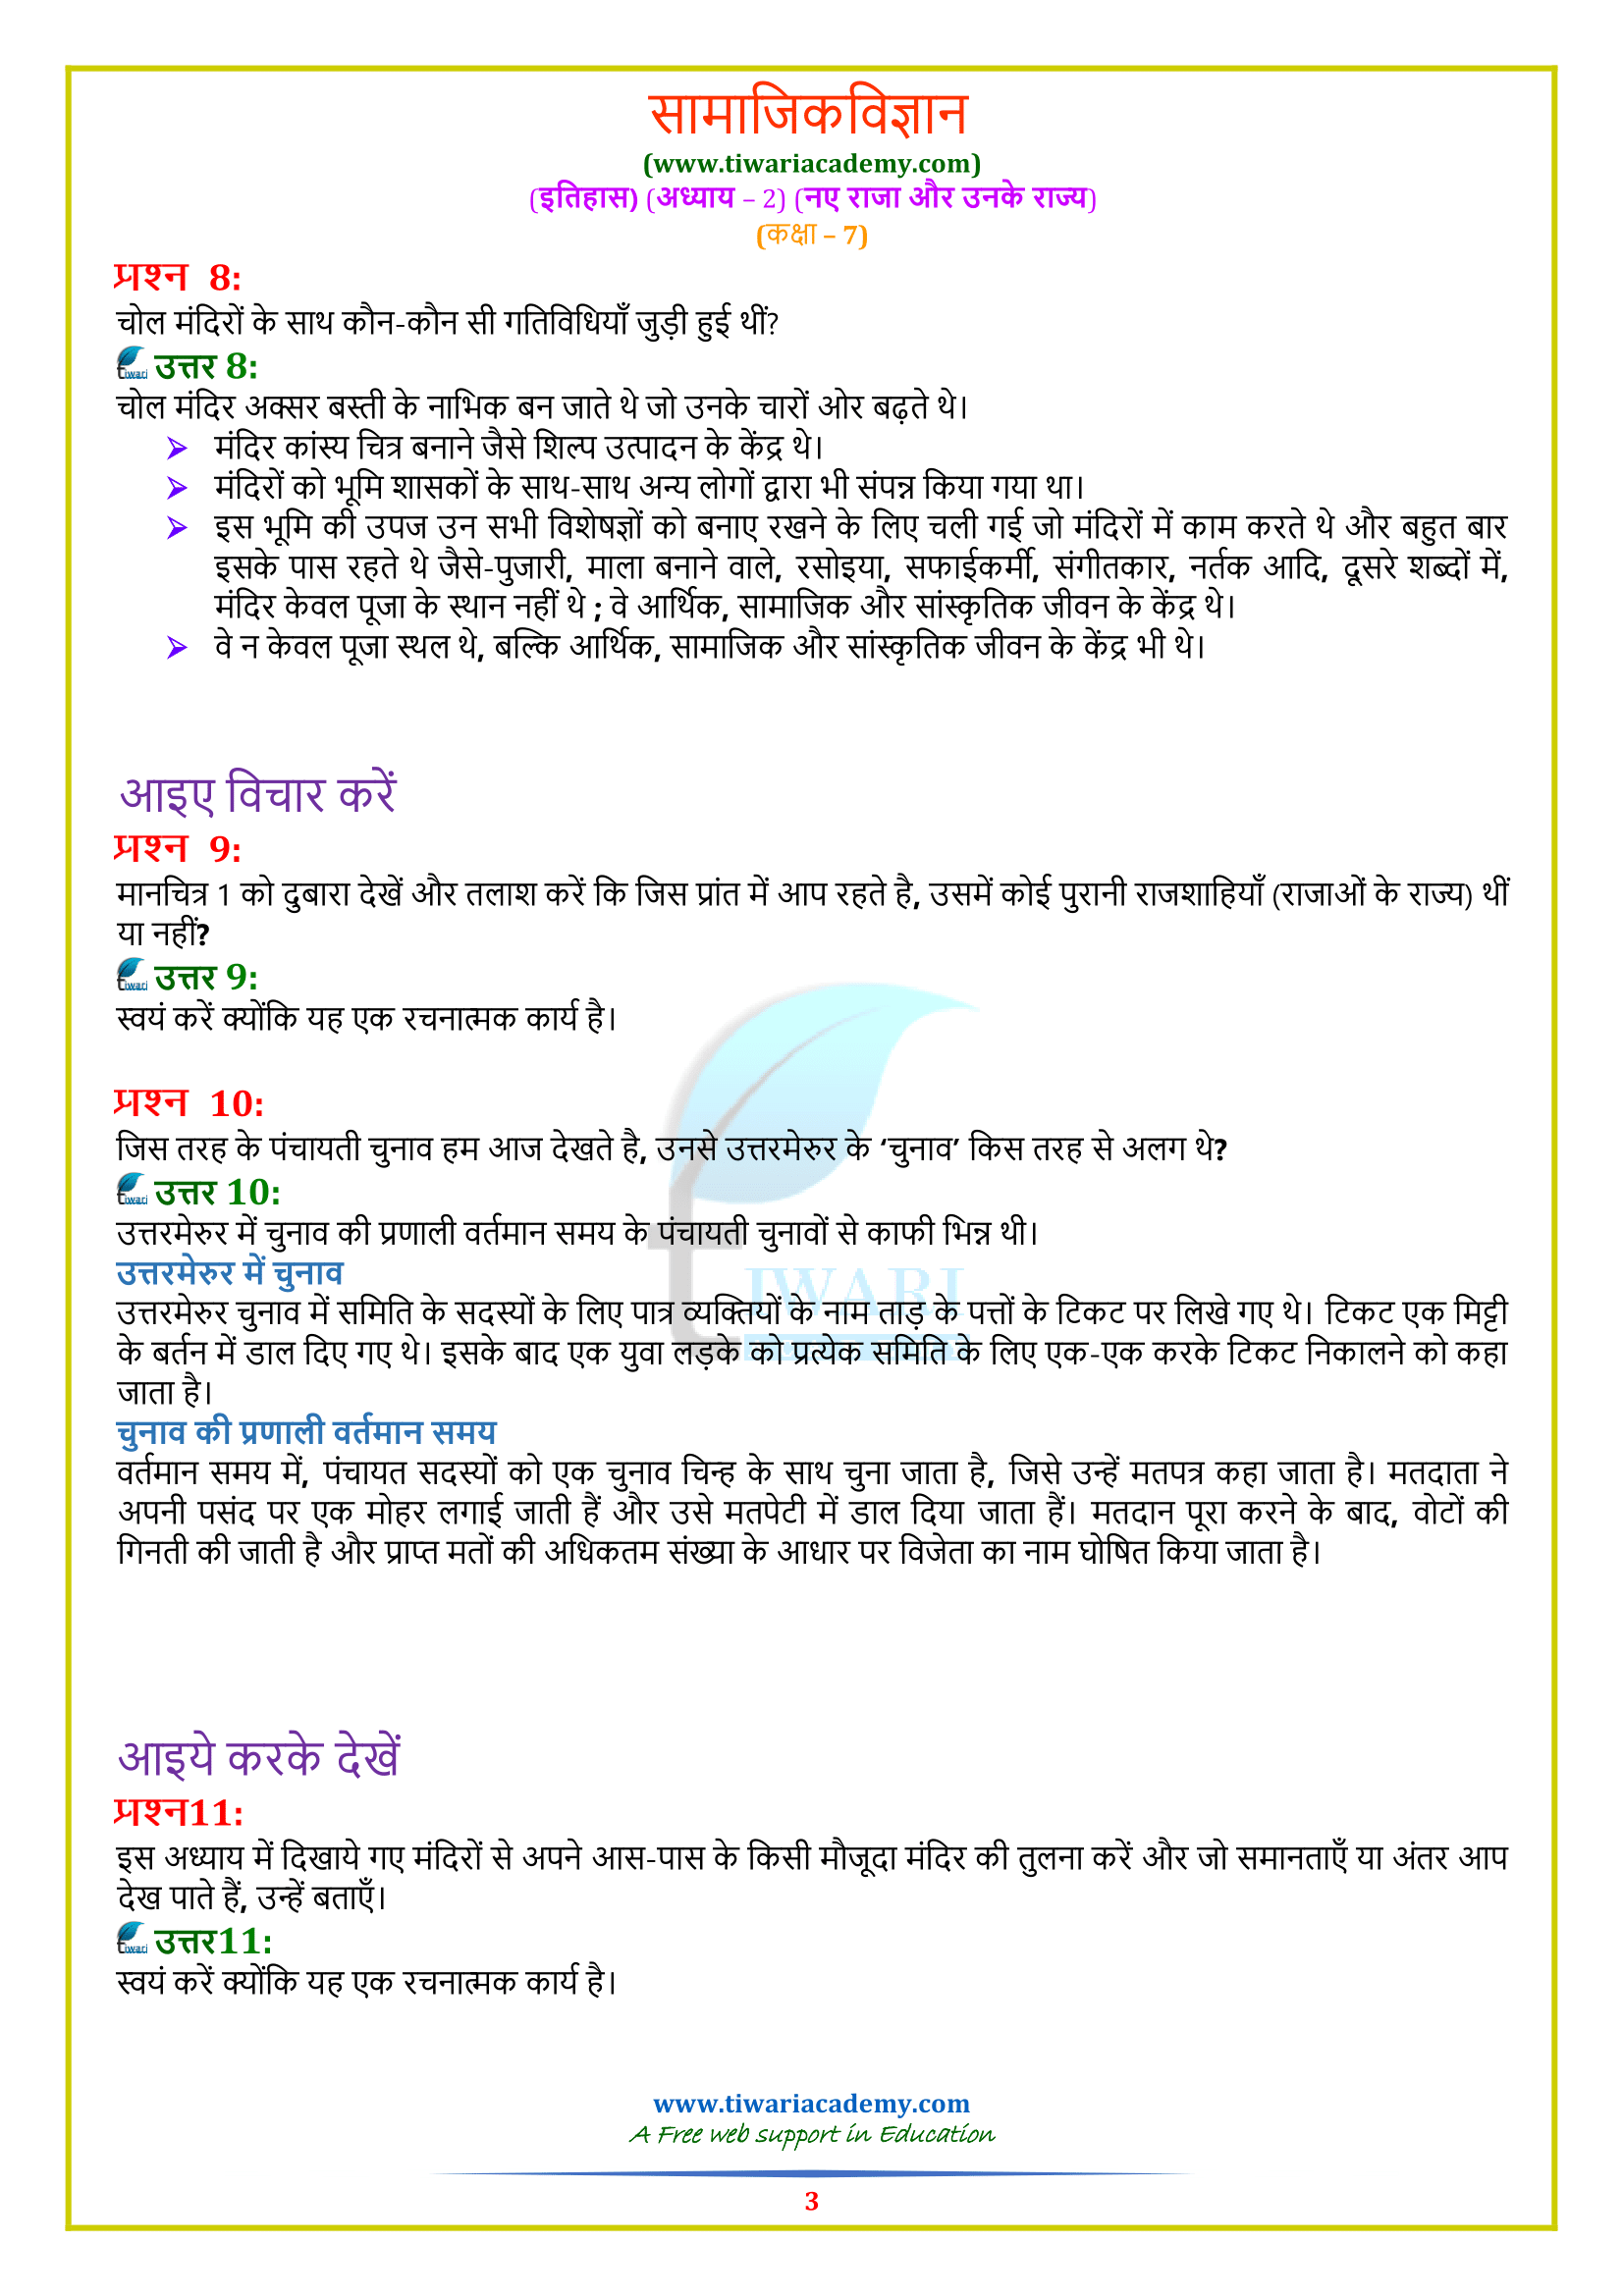 NCERT Solutions for Class 7 Social Science History chapter 2 in Hindi